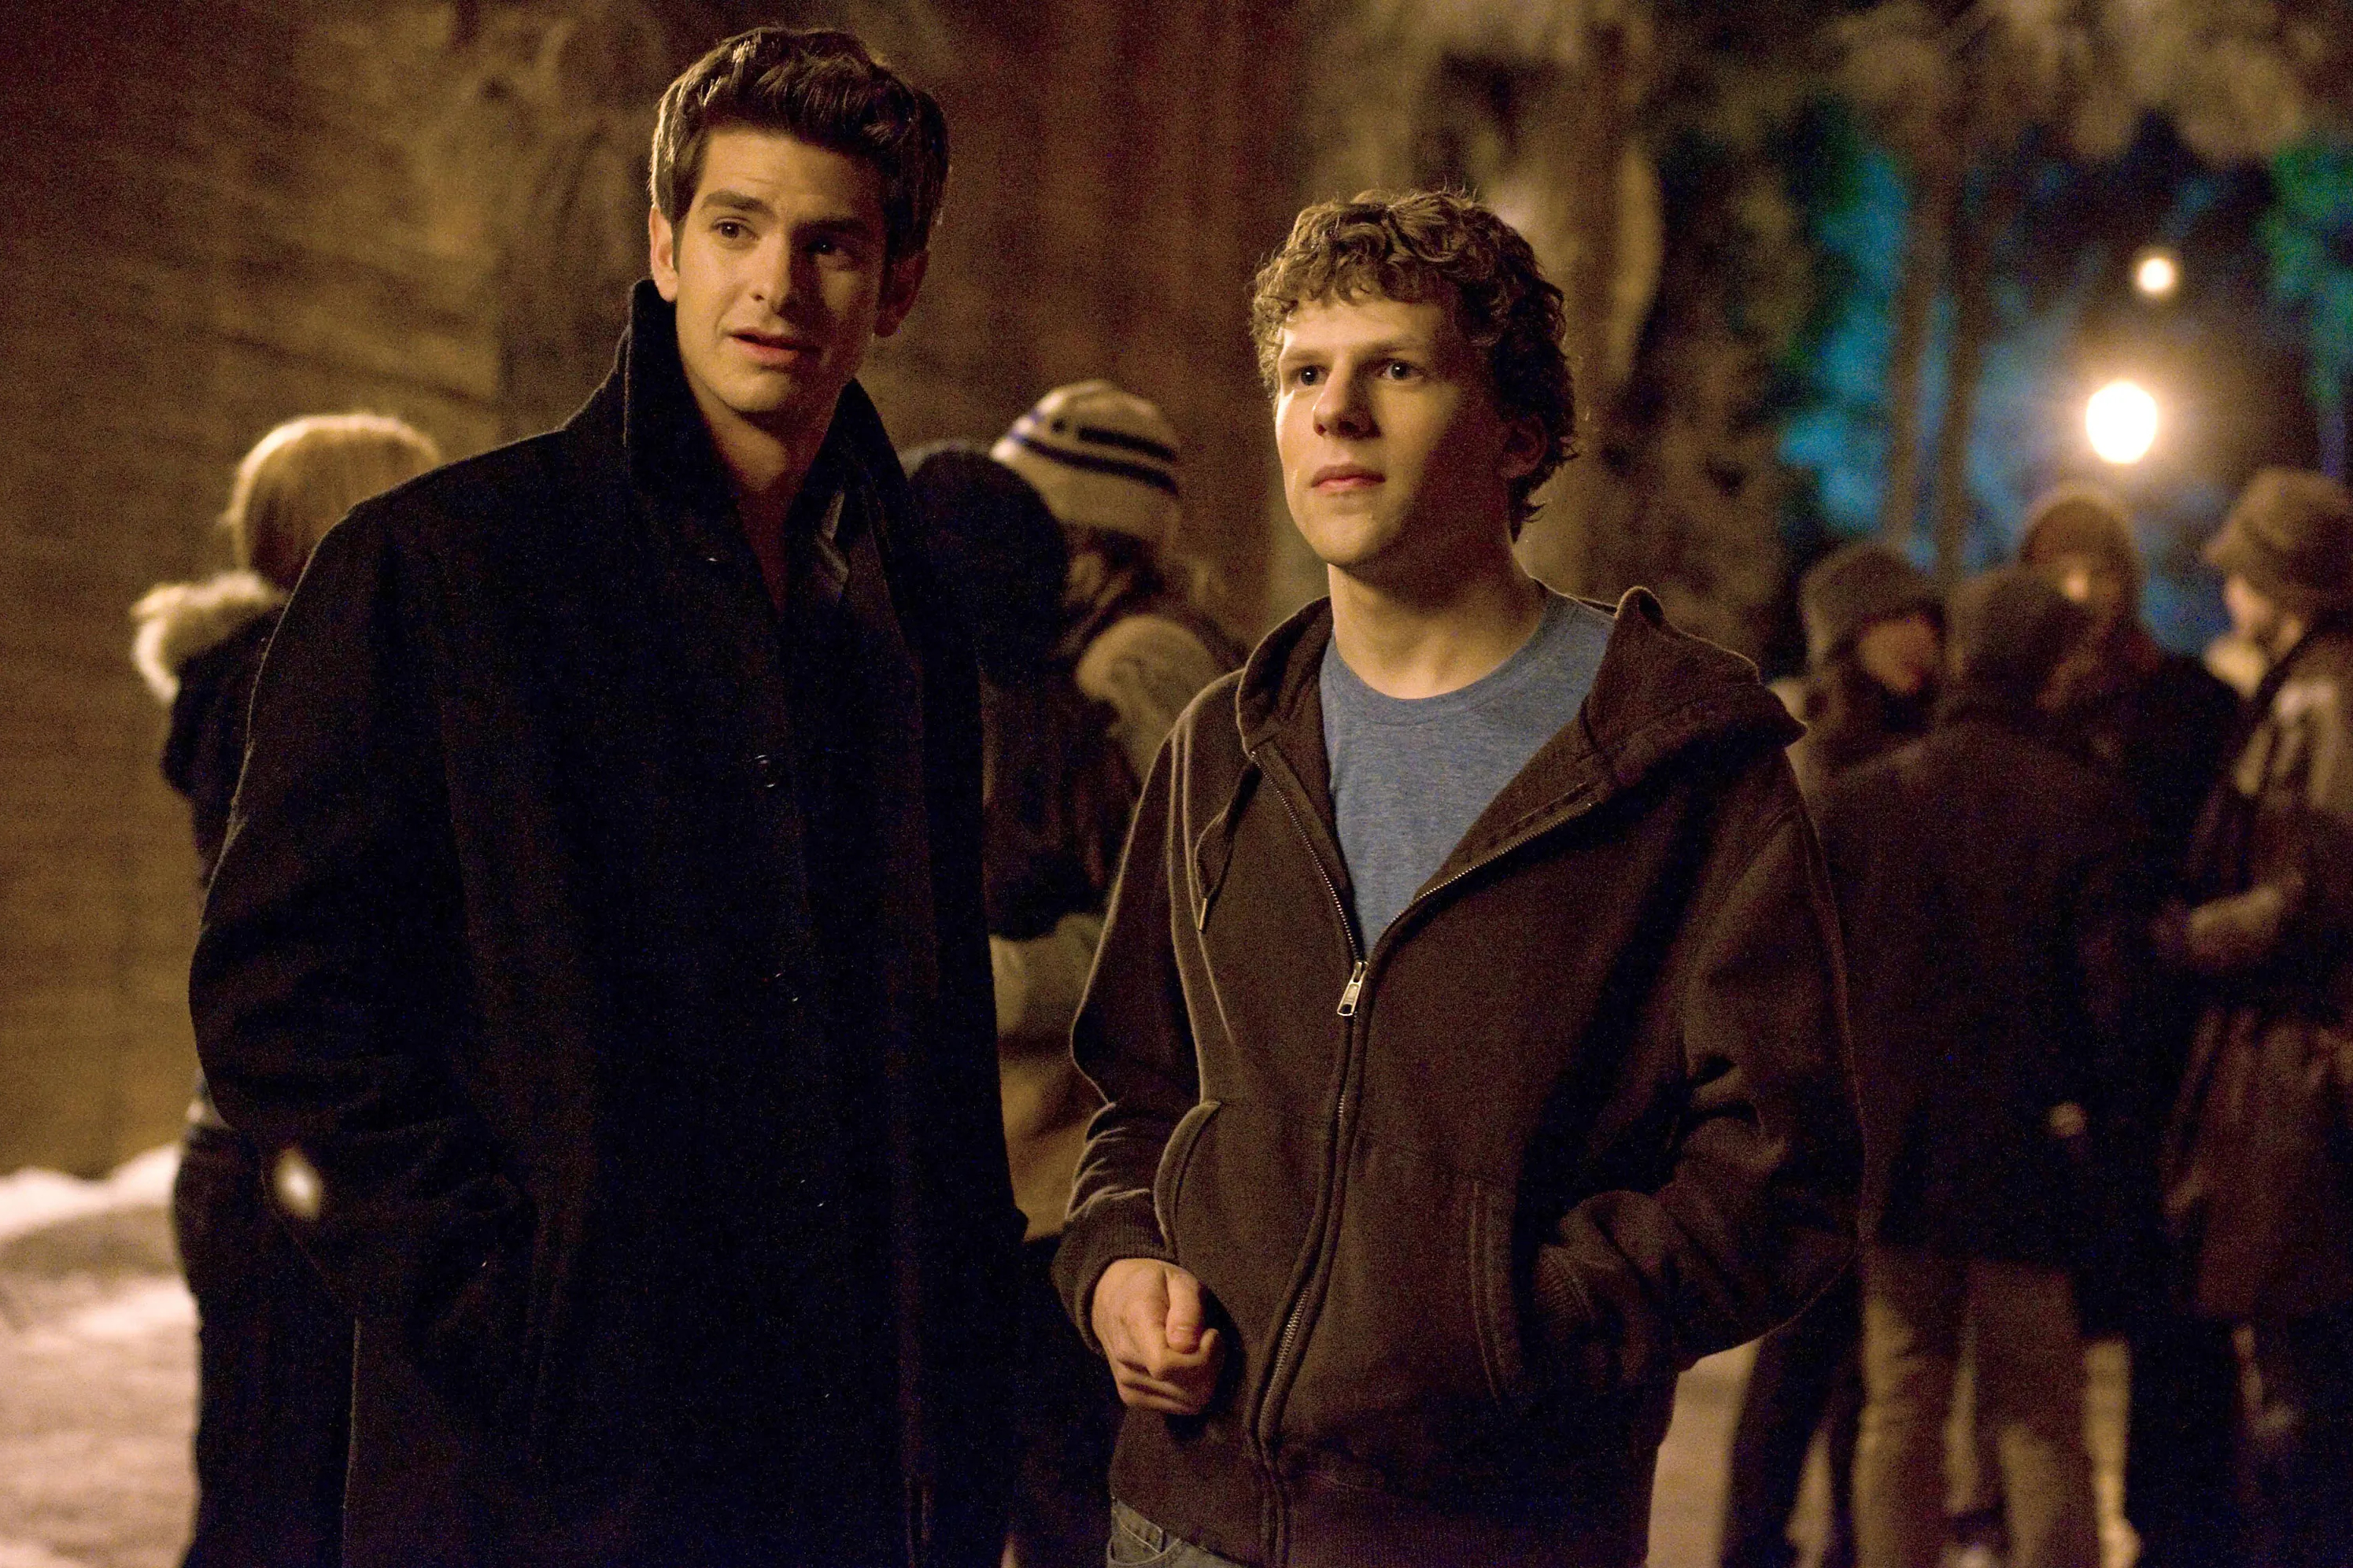 Andrew Garfield and Jesse Eisenberg stand outside together in The Social Network.